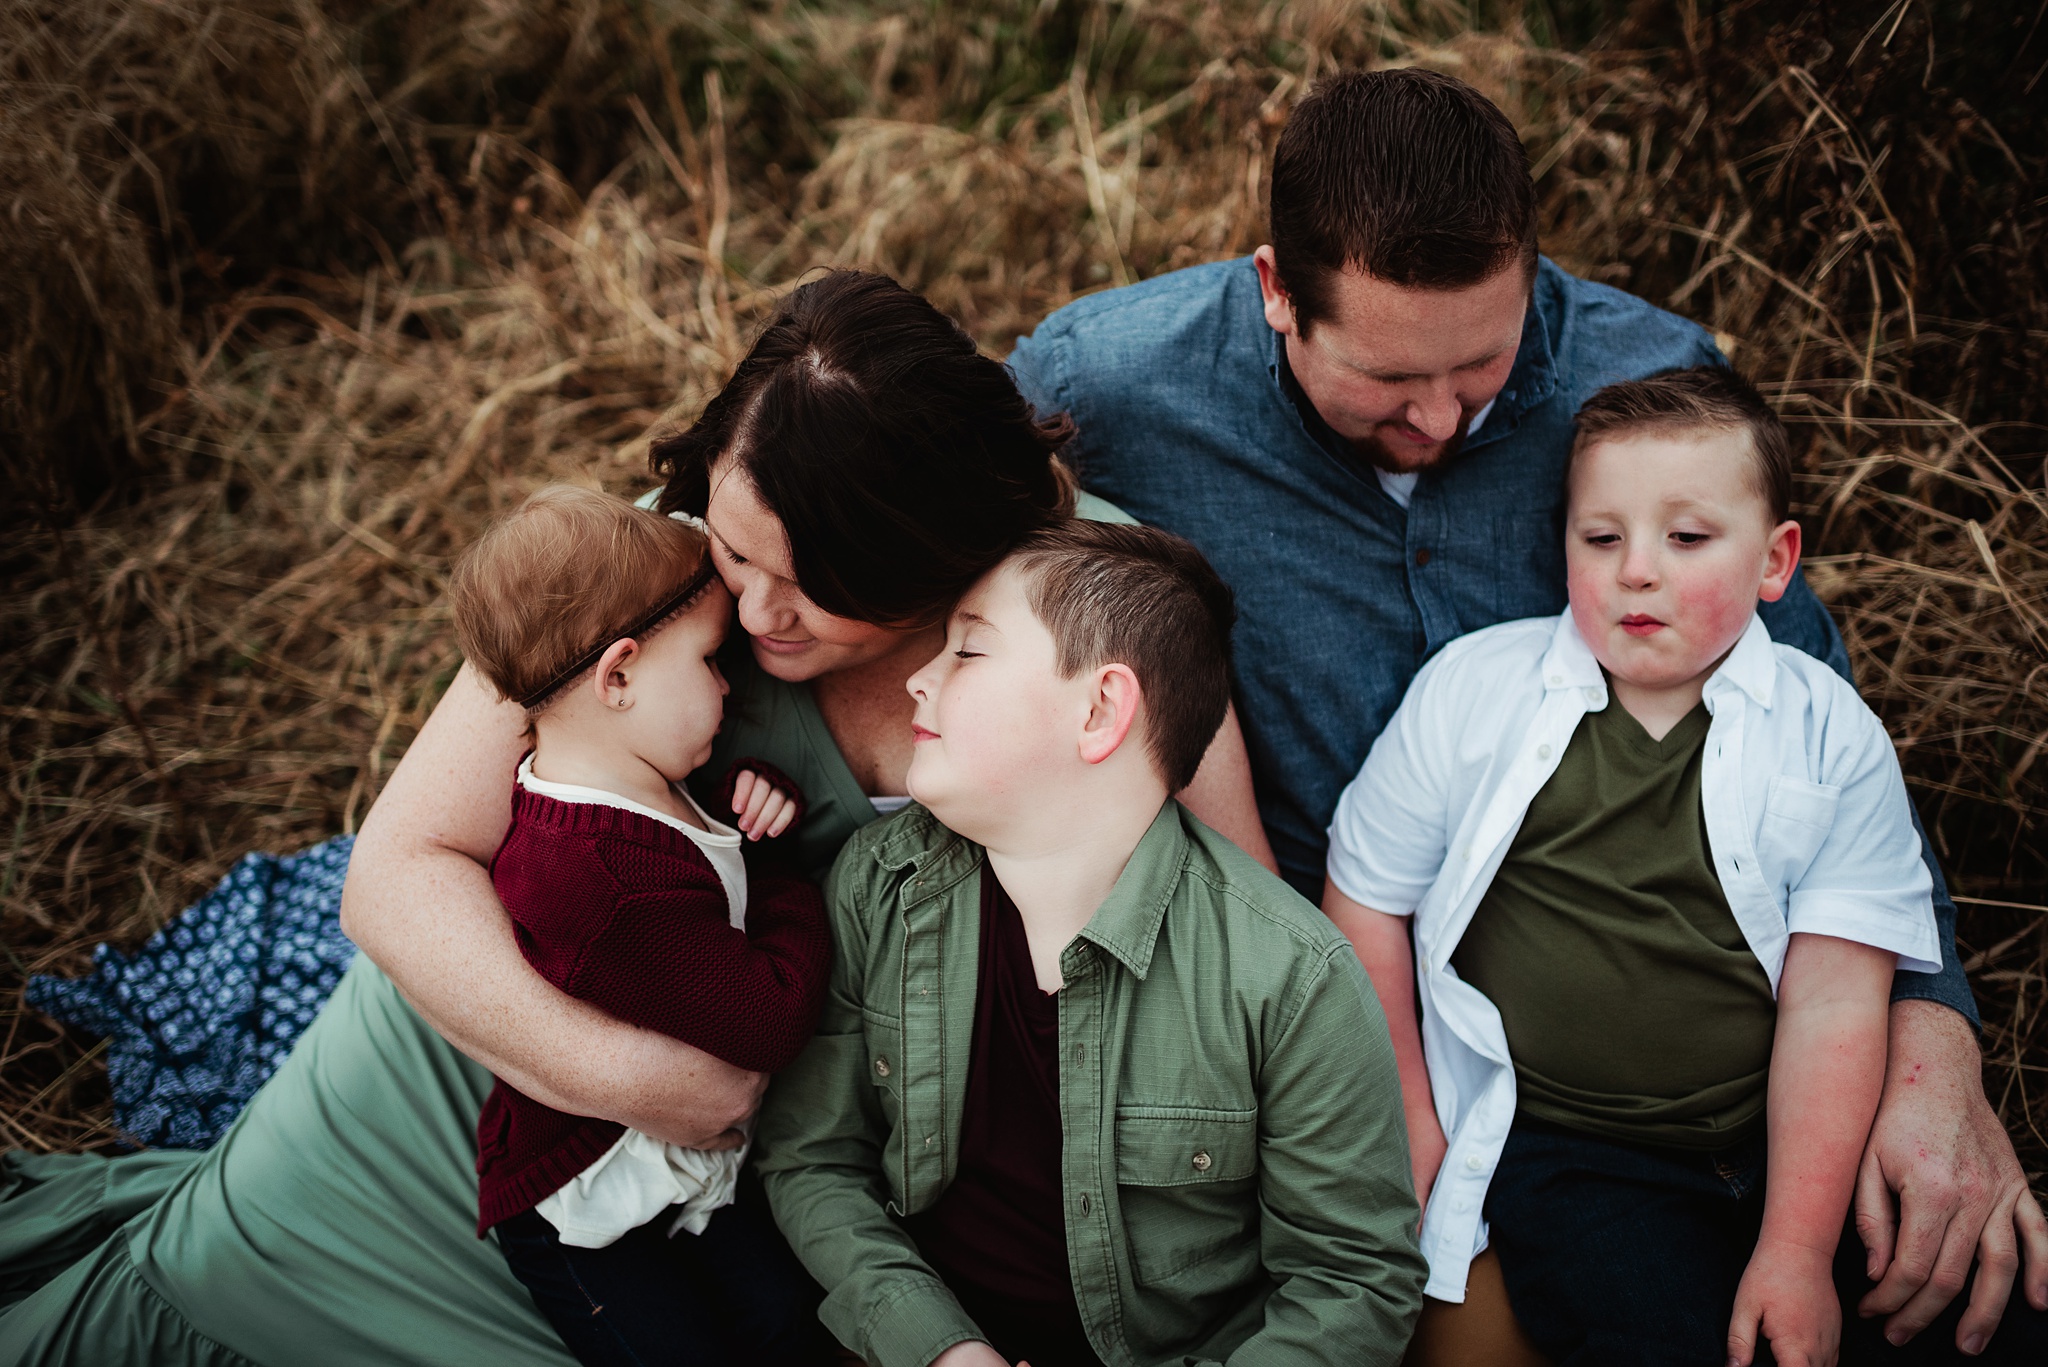 Family of Five Session on the Farm